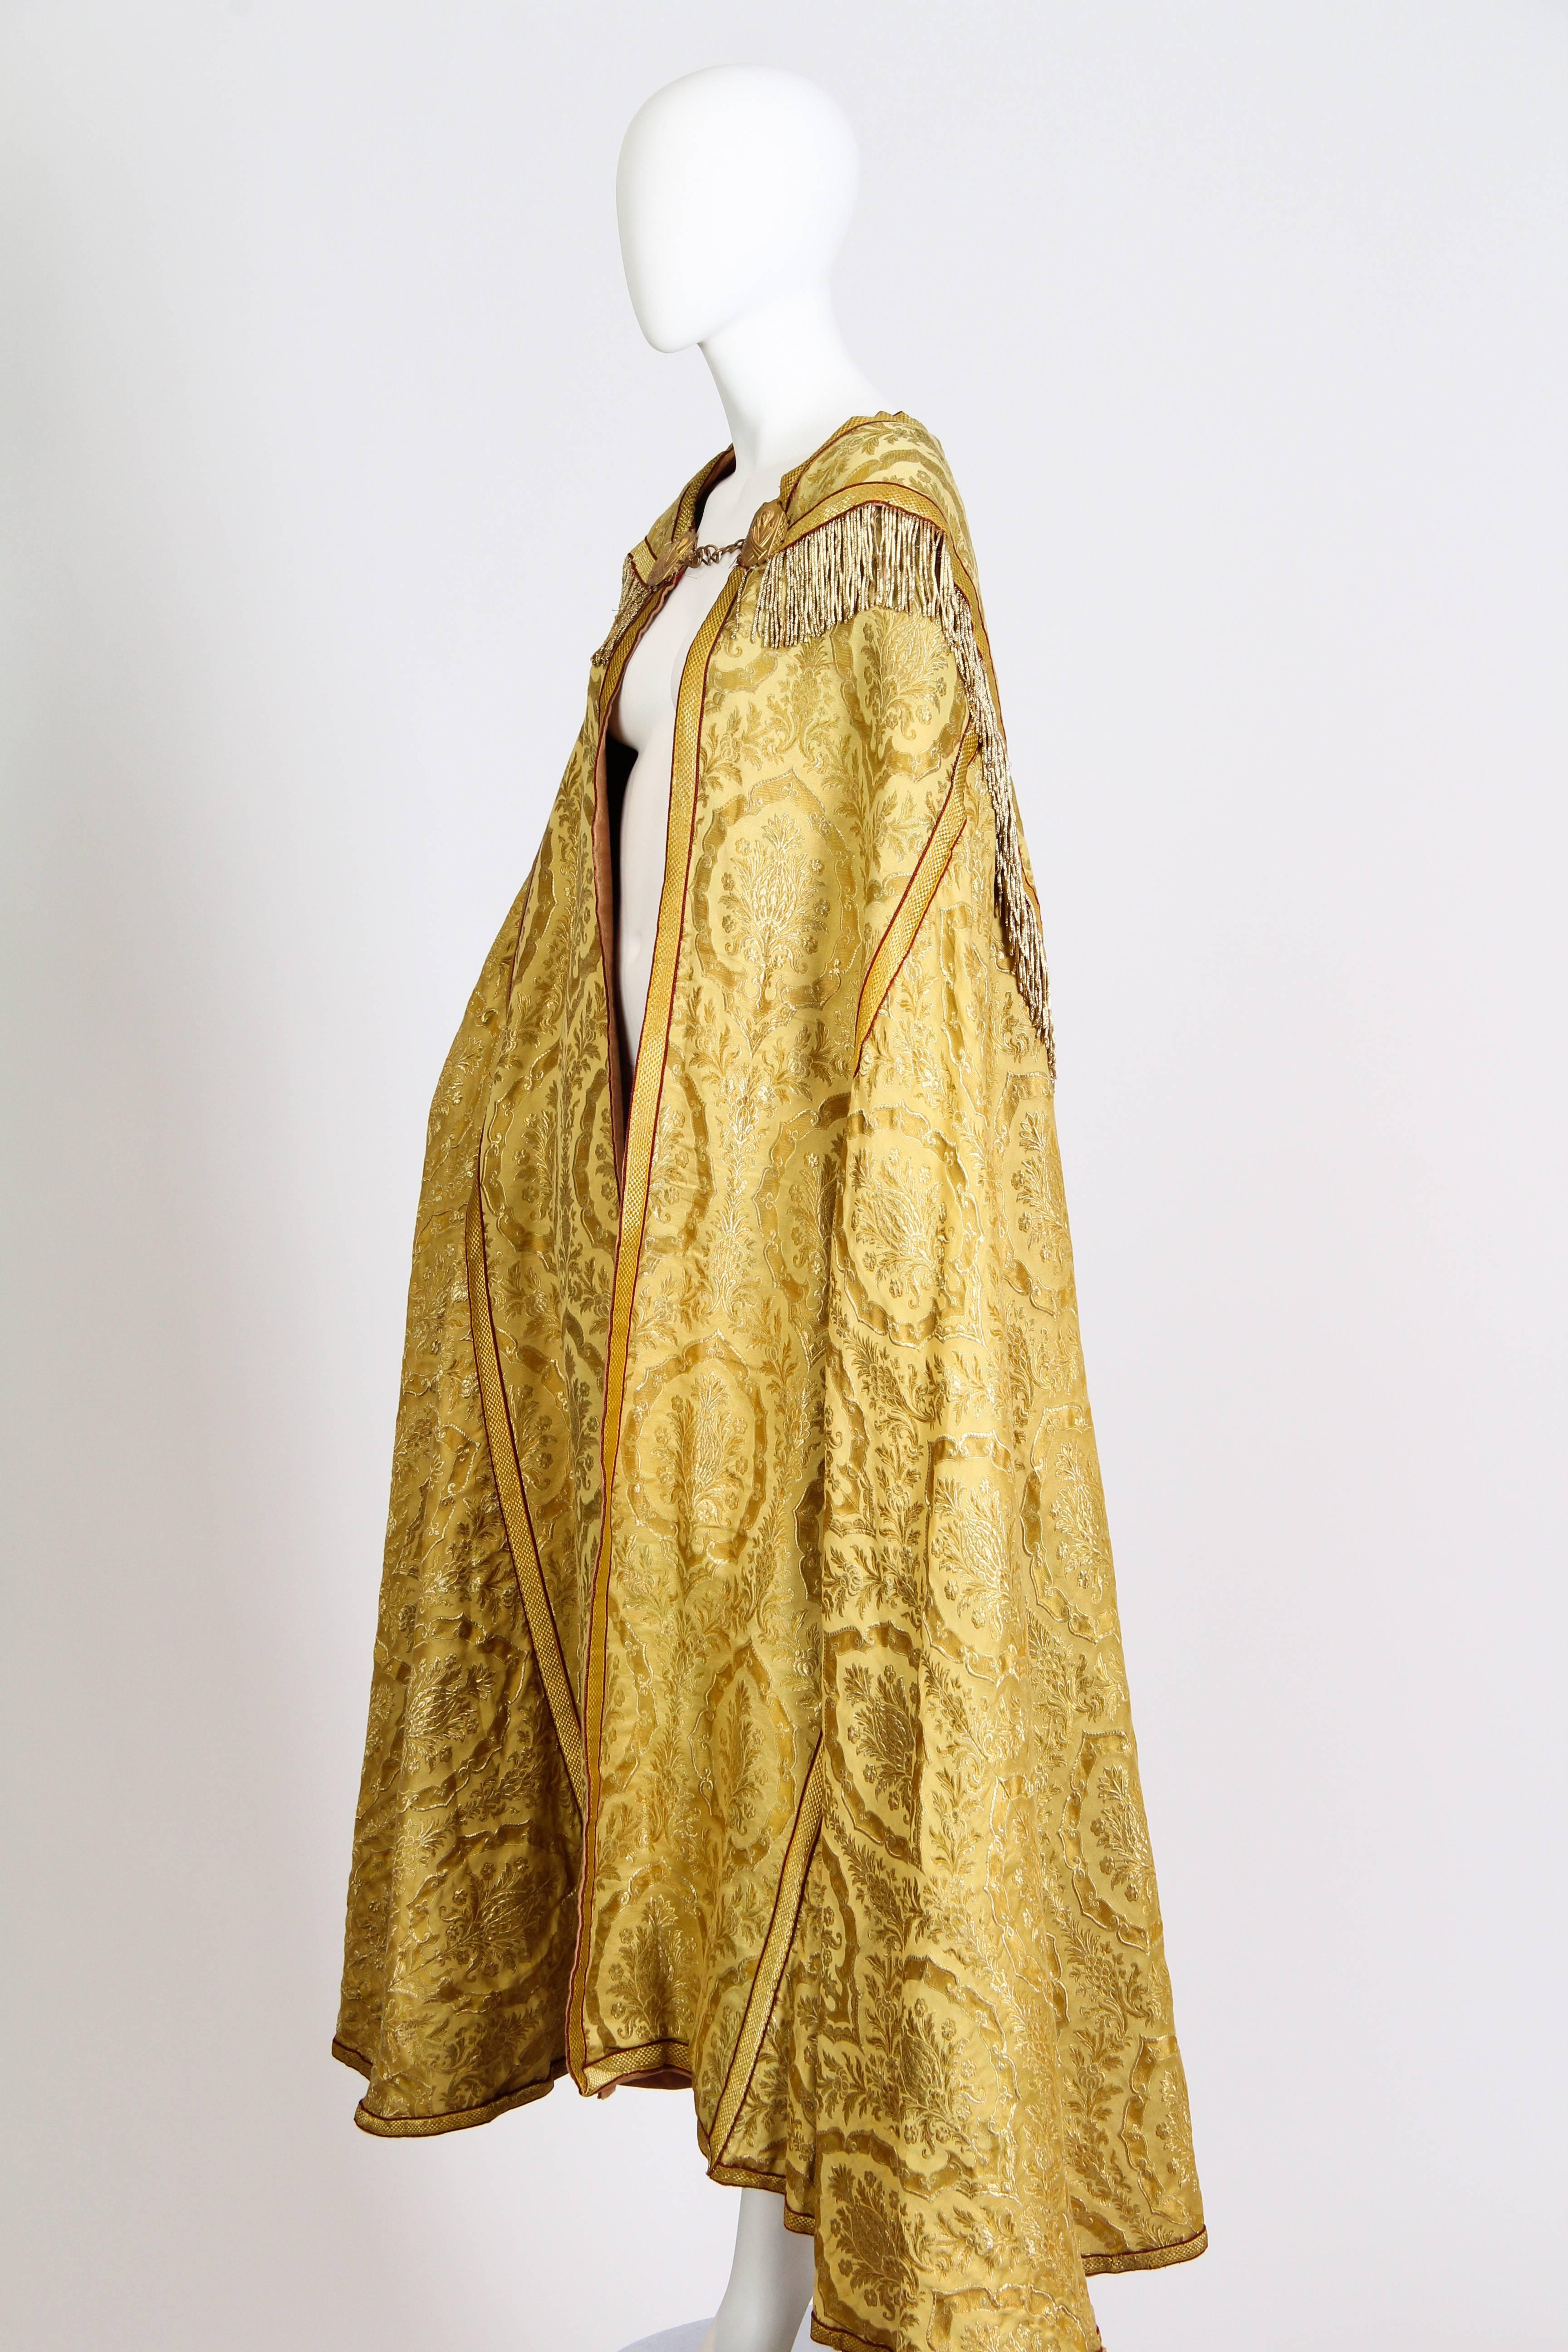 Dating from the first half of the 20th century this cape is most likely of religious origin. With angels cast in the clasp as well as the cloth is of the heavy types of tapestries used in ecclesiastical garments. The textile is woven with a cotton